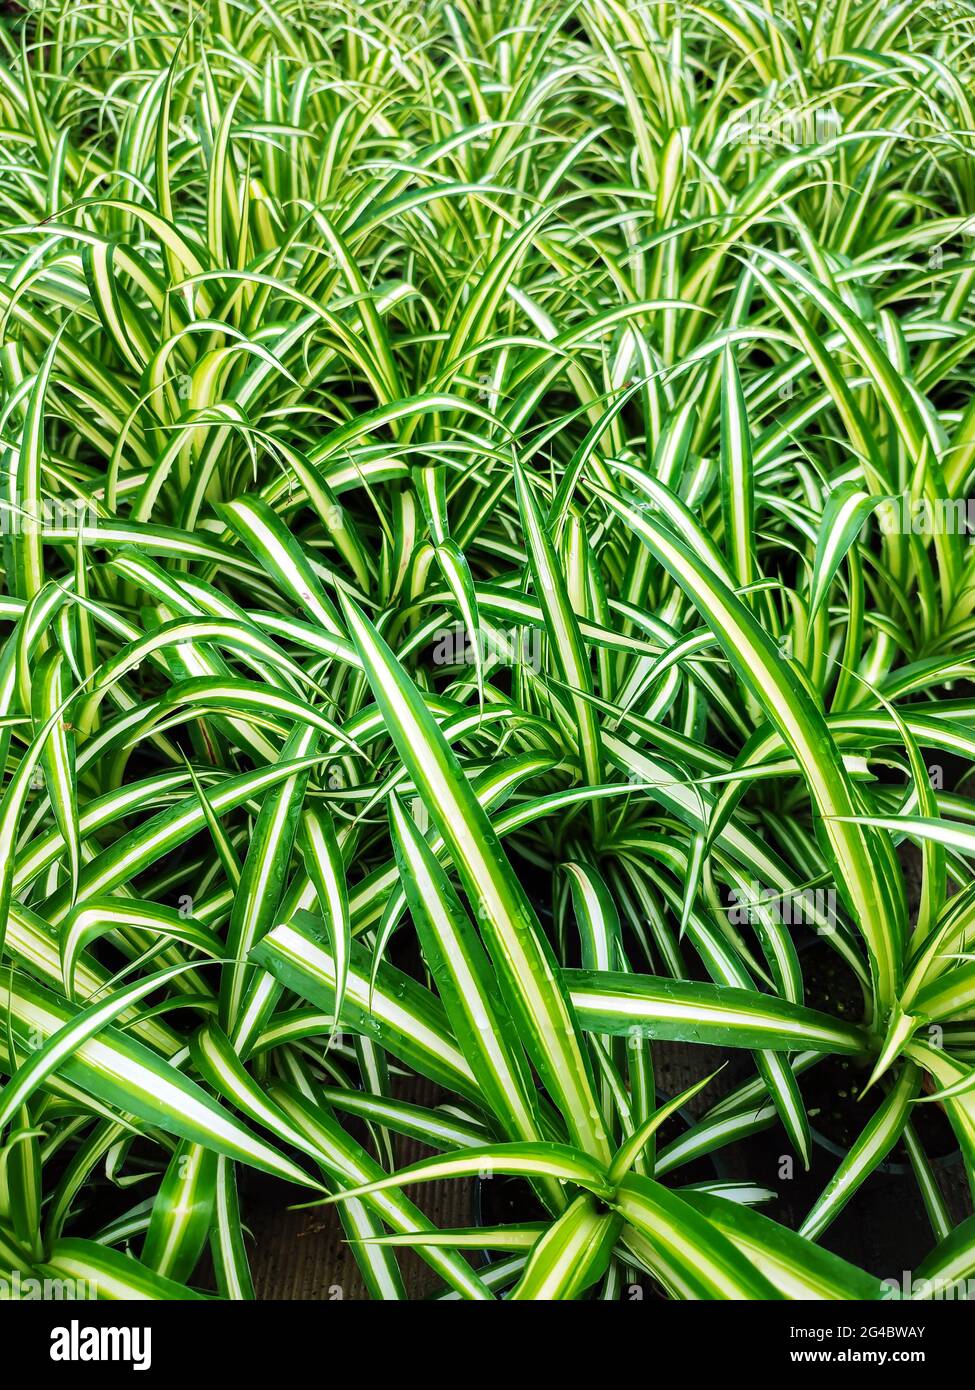 Green leaves of potted Spider Plant or Chlorophytum Comosum Plant Stock Photo